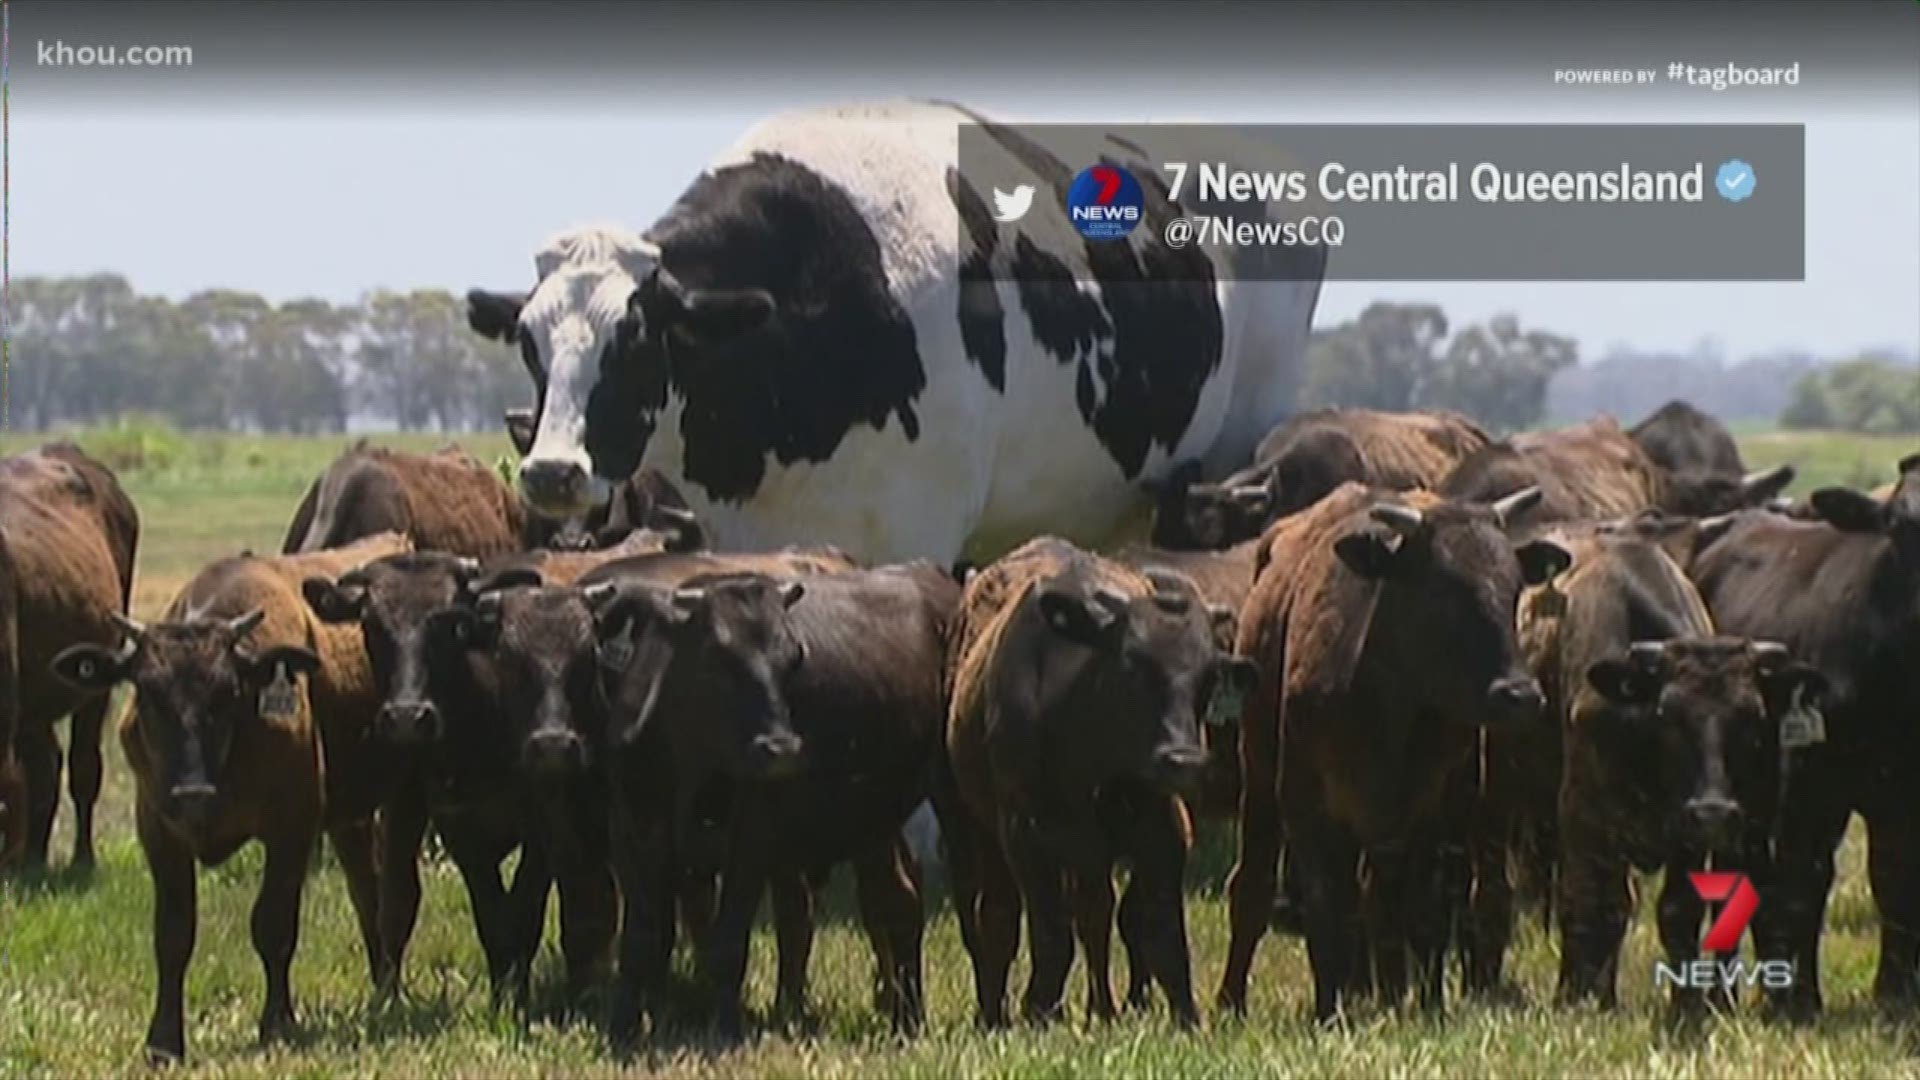 A giant bovine, lovingly called Knickers, lives in Australia and people can't get enough of it. Knickers stands 6 feet 4 inches tall and weighs 3,000 pounds.